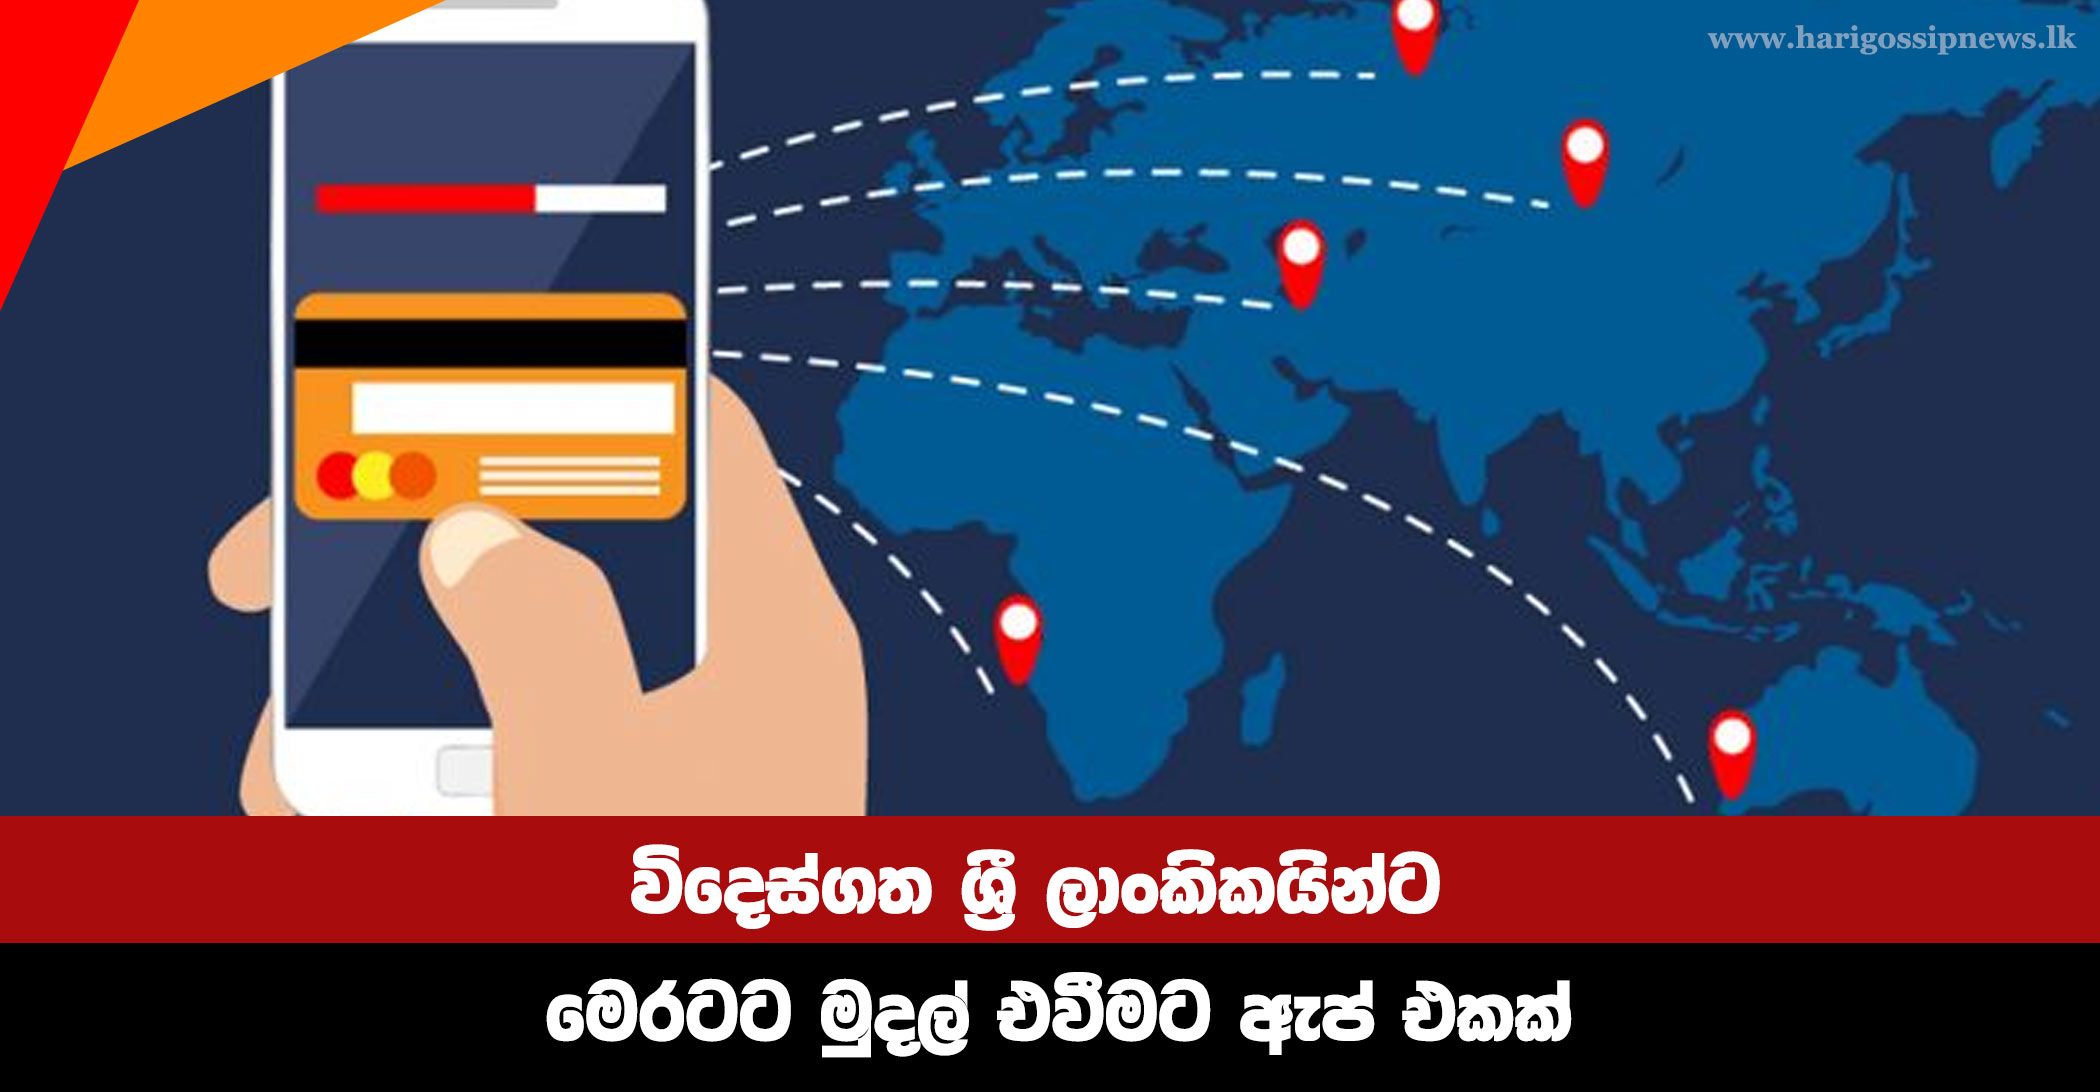 An app to send remittances to Sri Lankans abroad